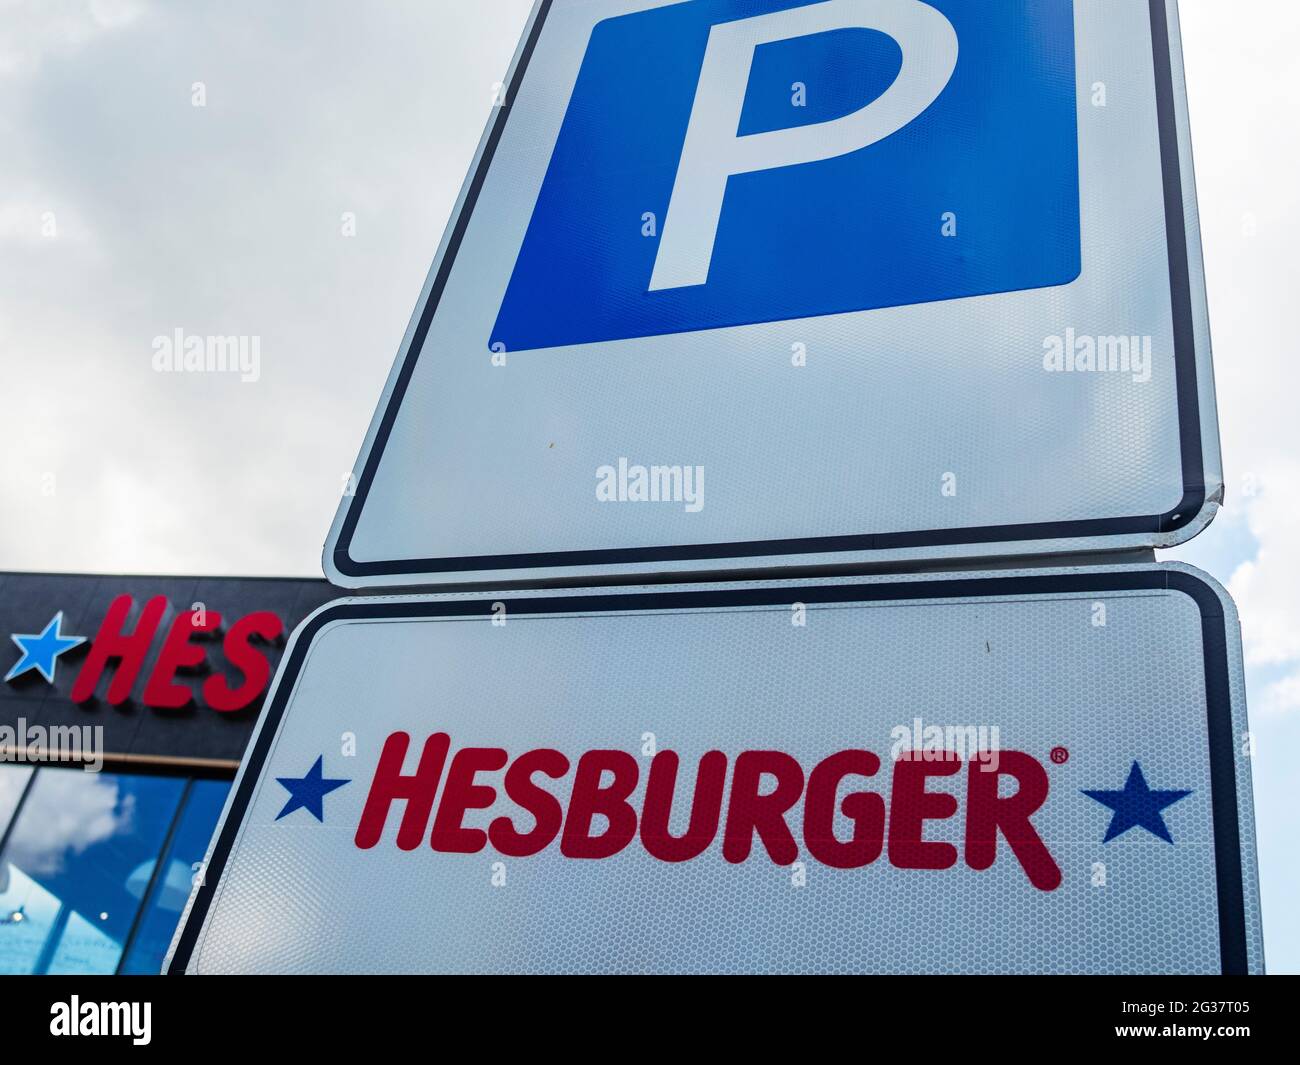 Parking of the Hesburger restaurant in the village of Shchasliv on the highway Kiev - Boryspil international airport. The Finnish restaurant chain Hesburger is actively developing in the capital region of Ukraine. Of the five hundred restaurants of this chain, seven operate in Kiev and the region. Stock Photo